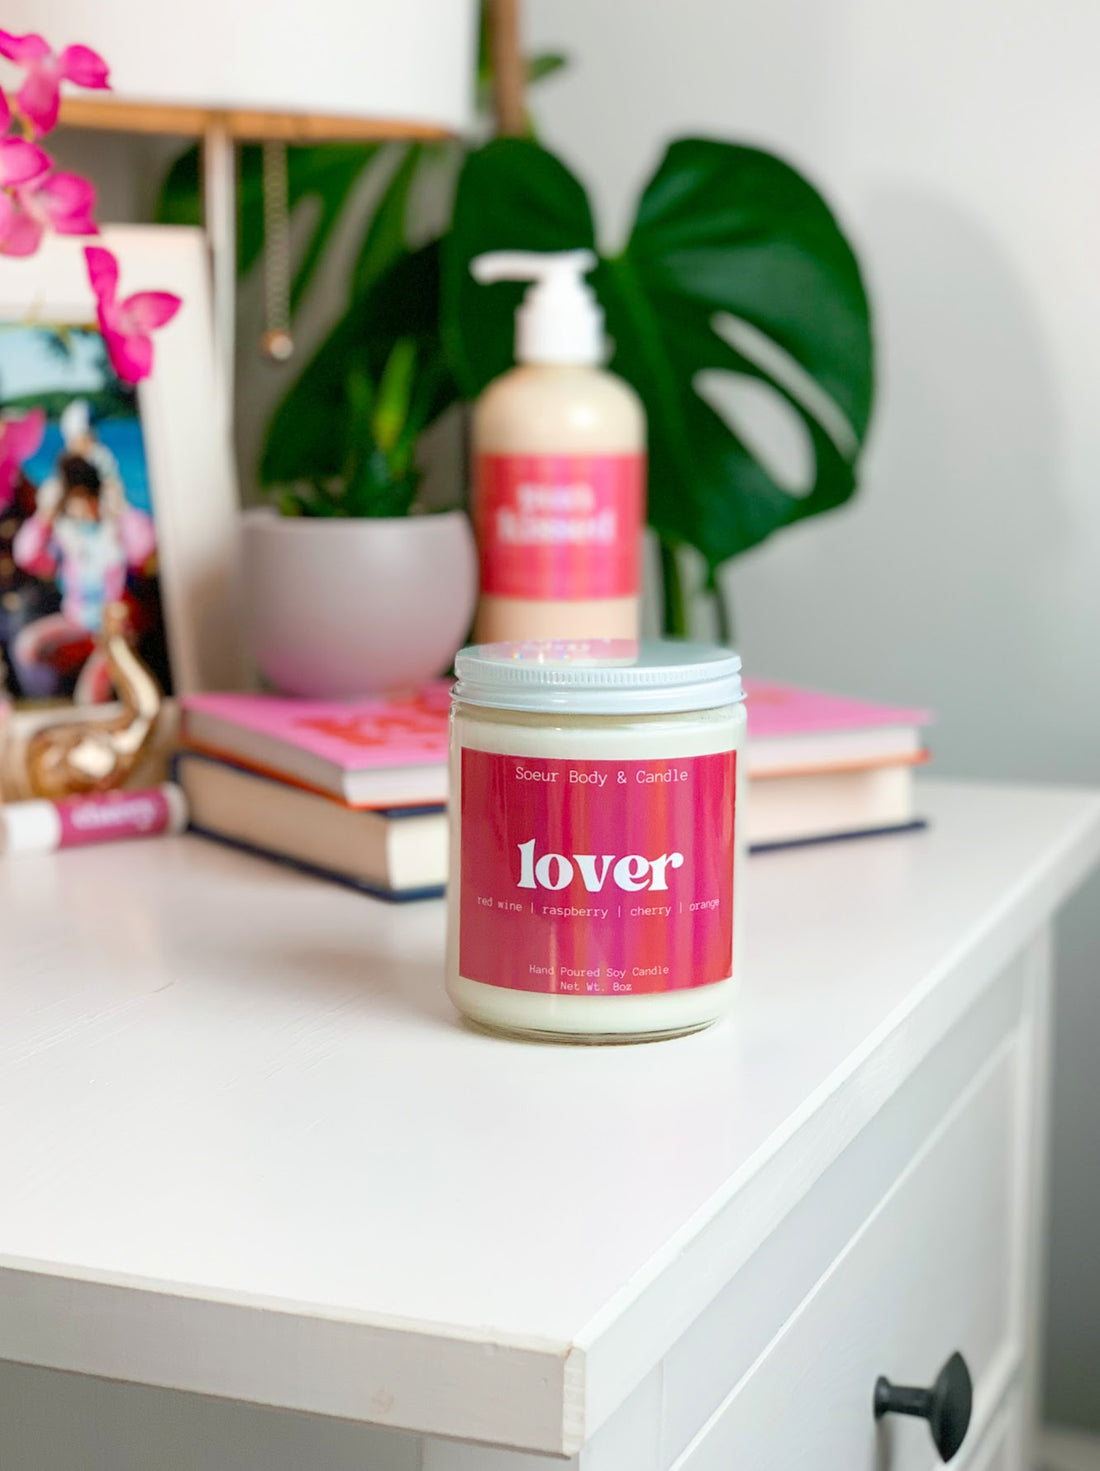 Lover Soy Candle (red wine, raspberry, cherry, orange)